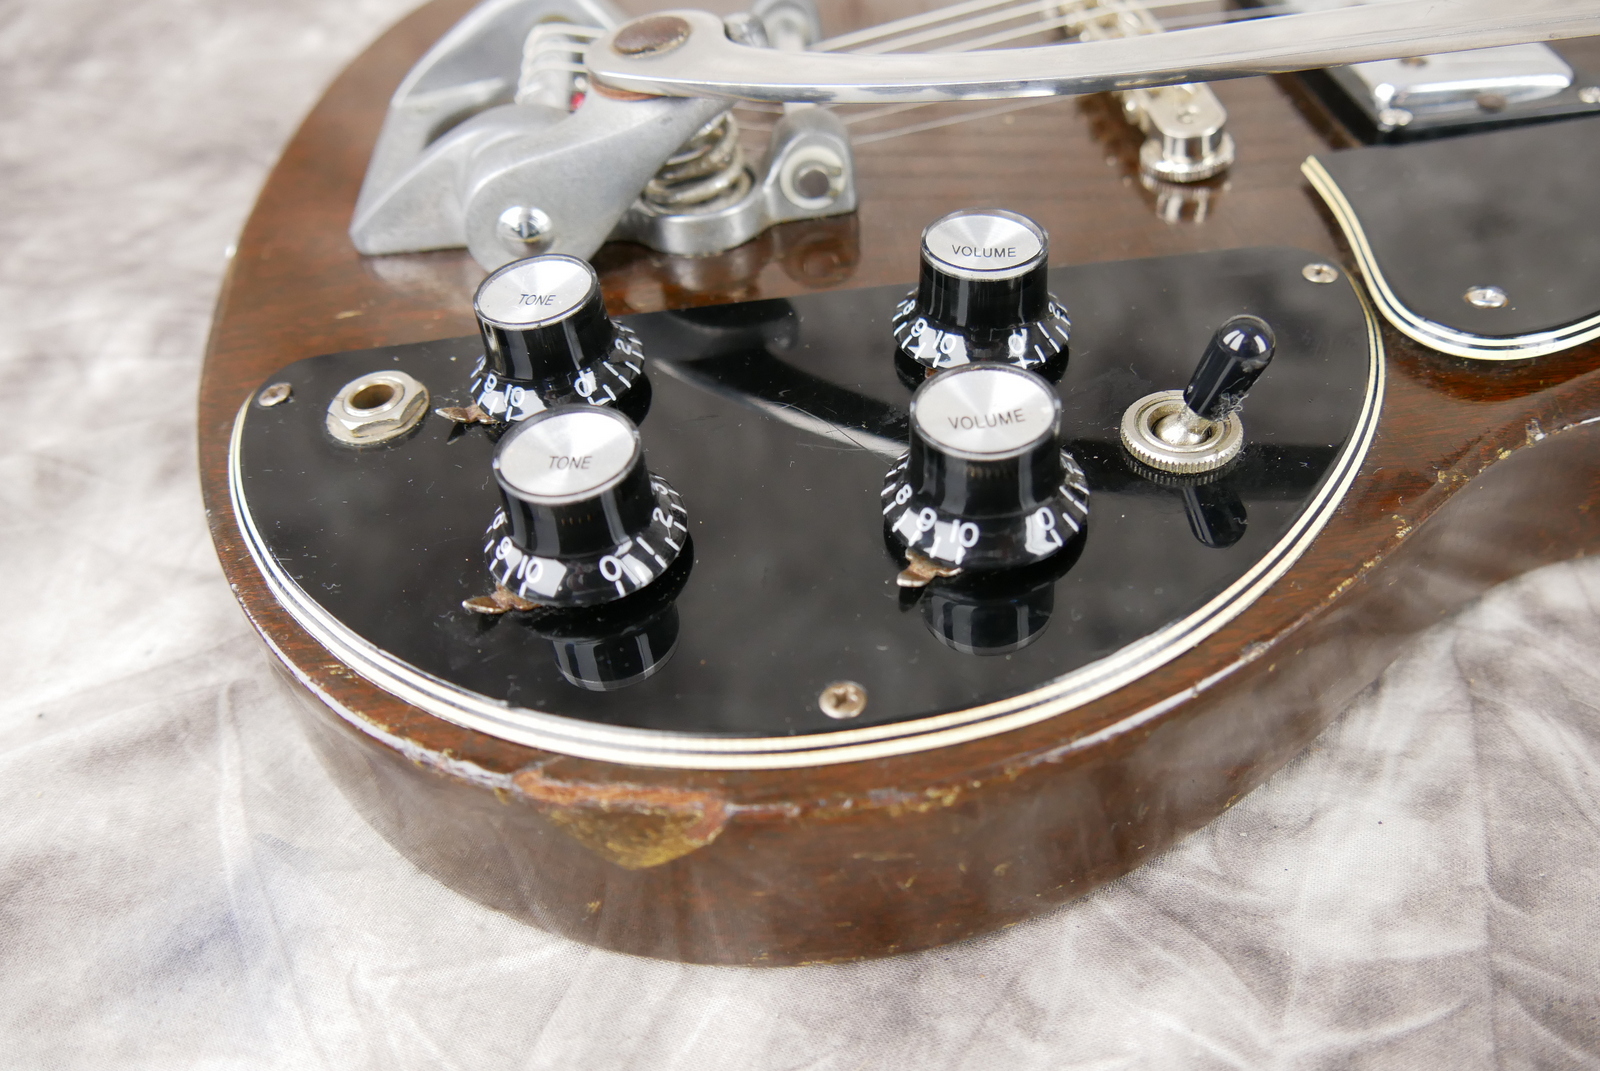 Gibson_SG_Deluxe_bigsby_1971_1972_walnut_cts-pots_1966-020.JPG